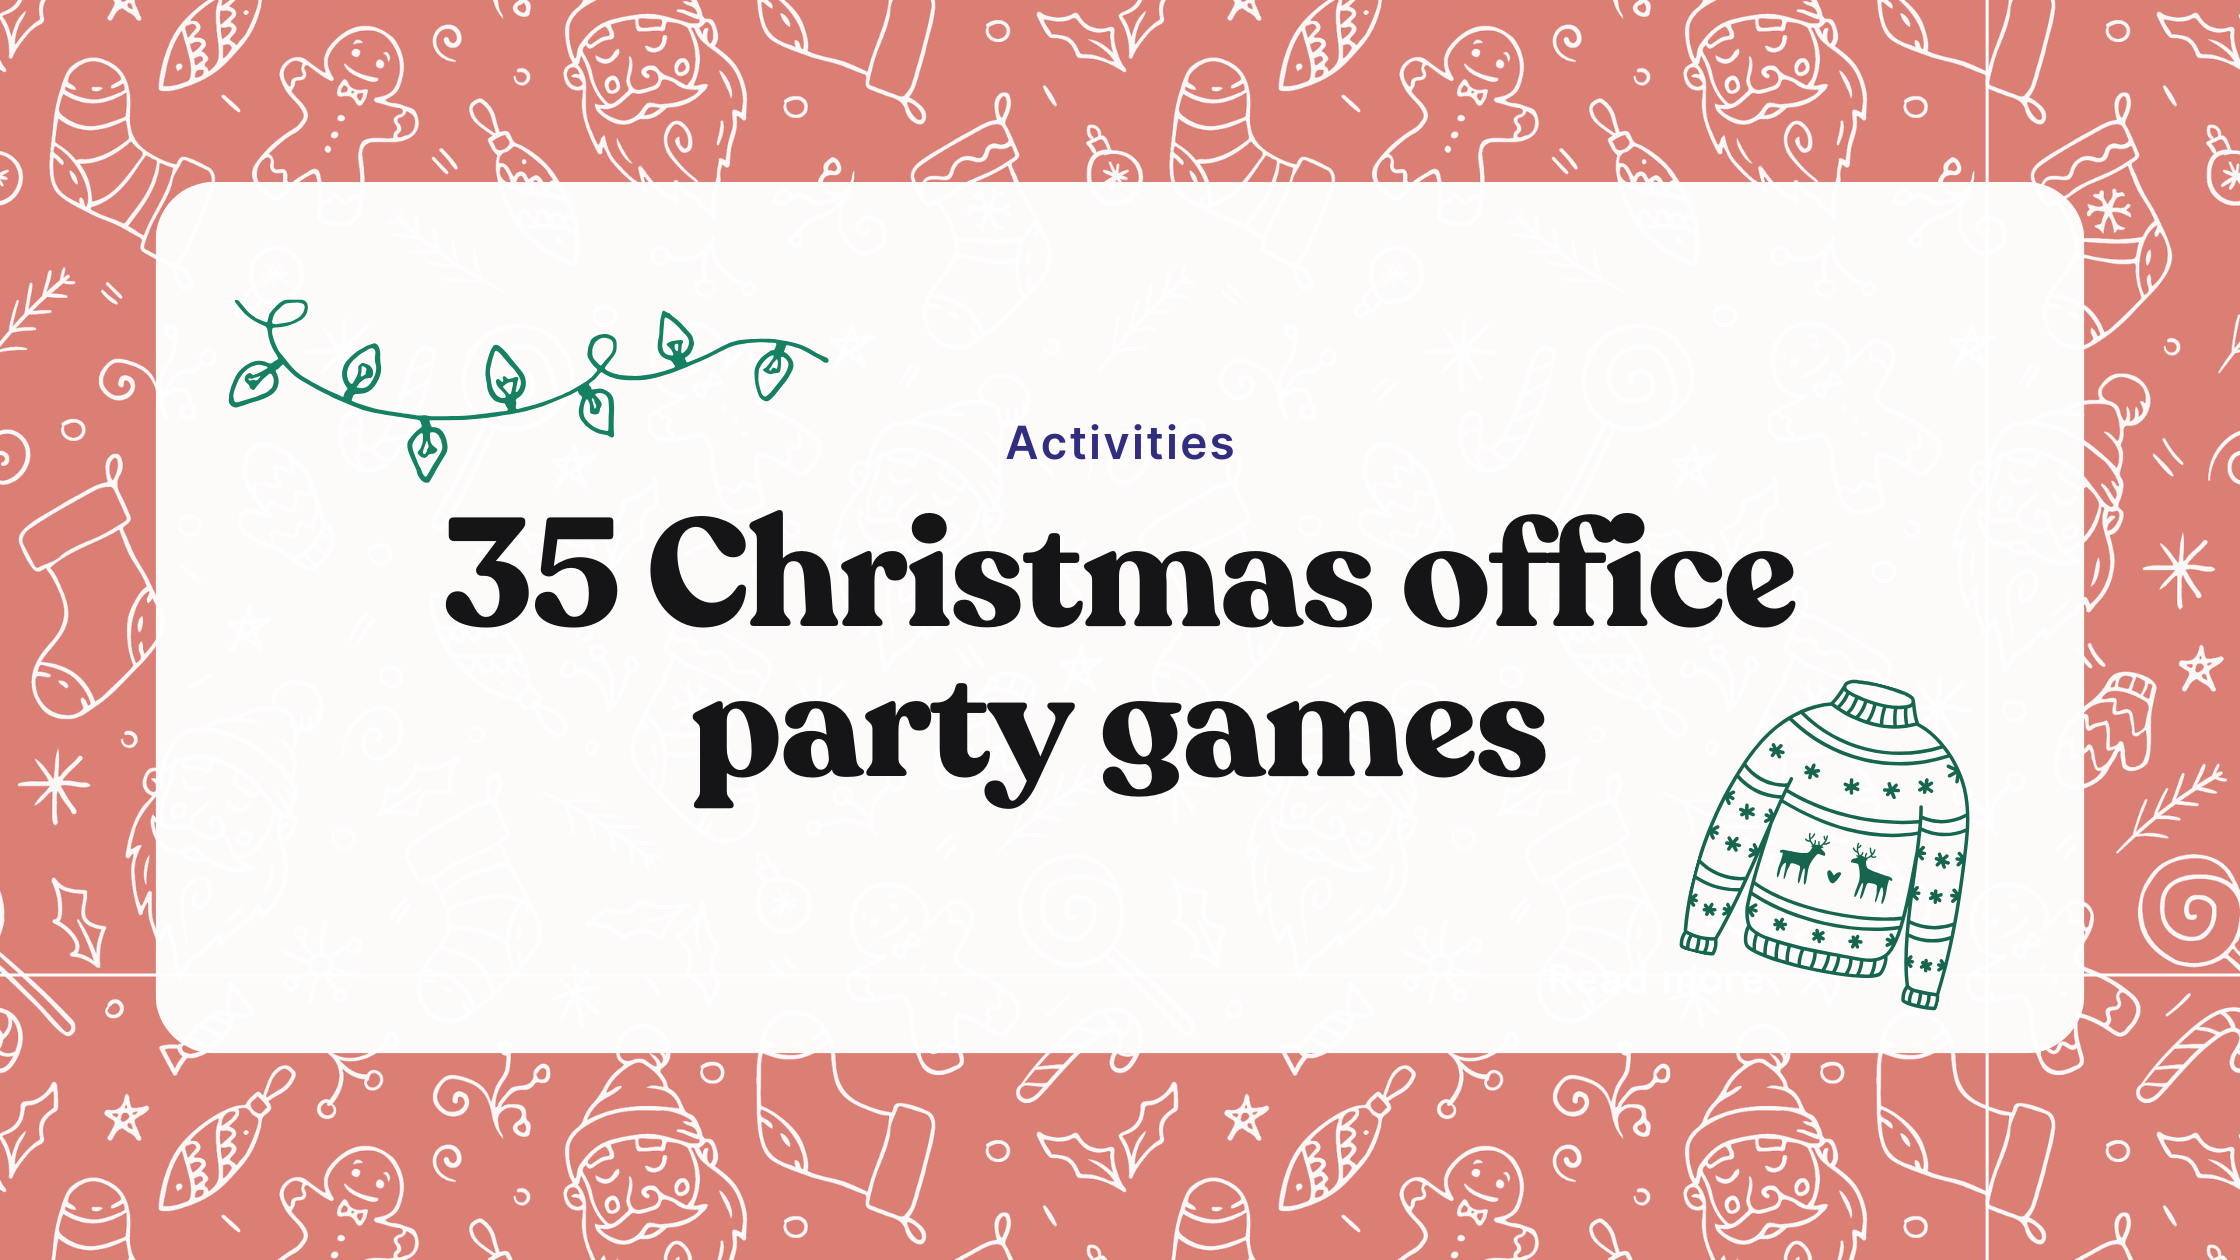 35 Christmas office party games